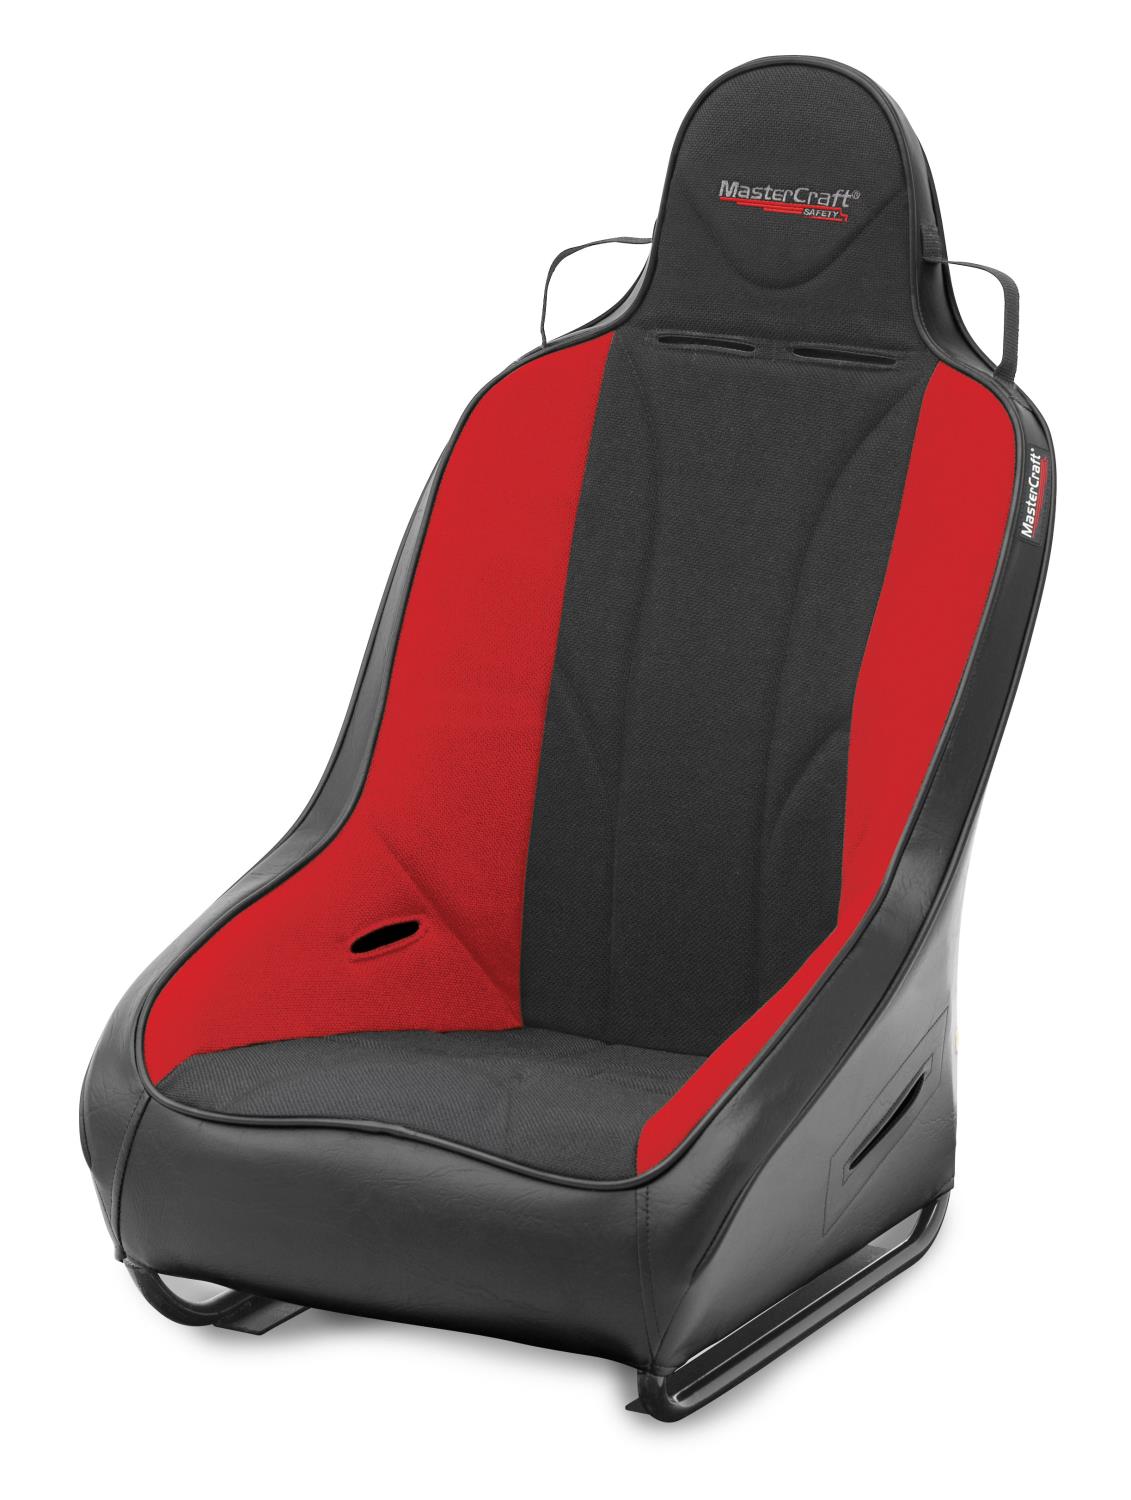 560212 2 in. WIDER PROSeat w/Fixed Headrest, Black with Black Fabric Center and Red Side Panels, Black Band w/BRS Stitch Pattern